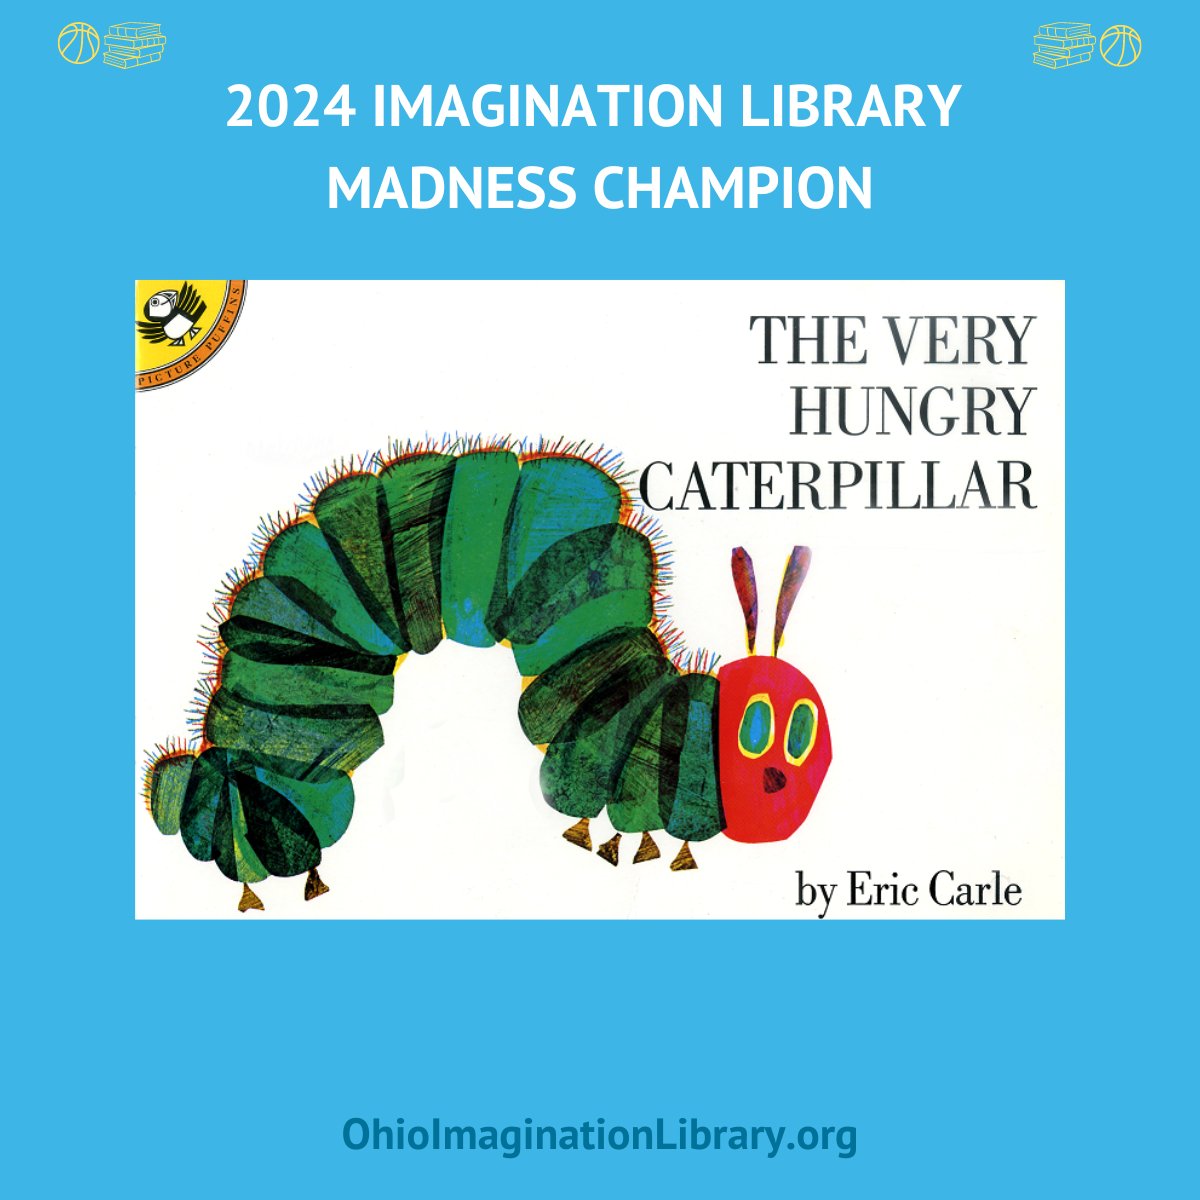 This year's #ImaginationLibraryMadness winner is 'The Very Hungry Caterpillar' 🦋🏀📗 Thanks to everyone who voted for their favorite @dollyslibrary book!